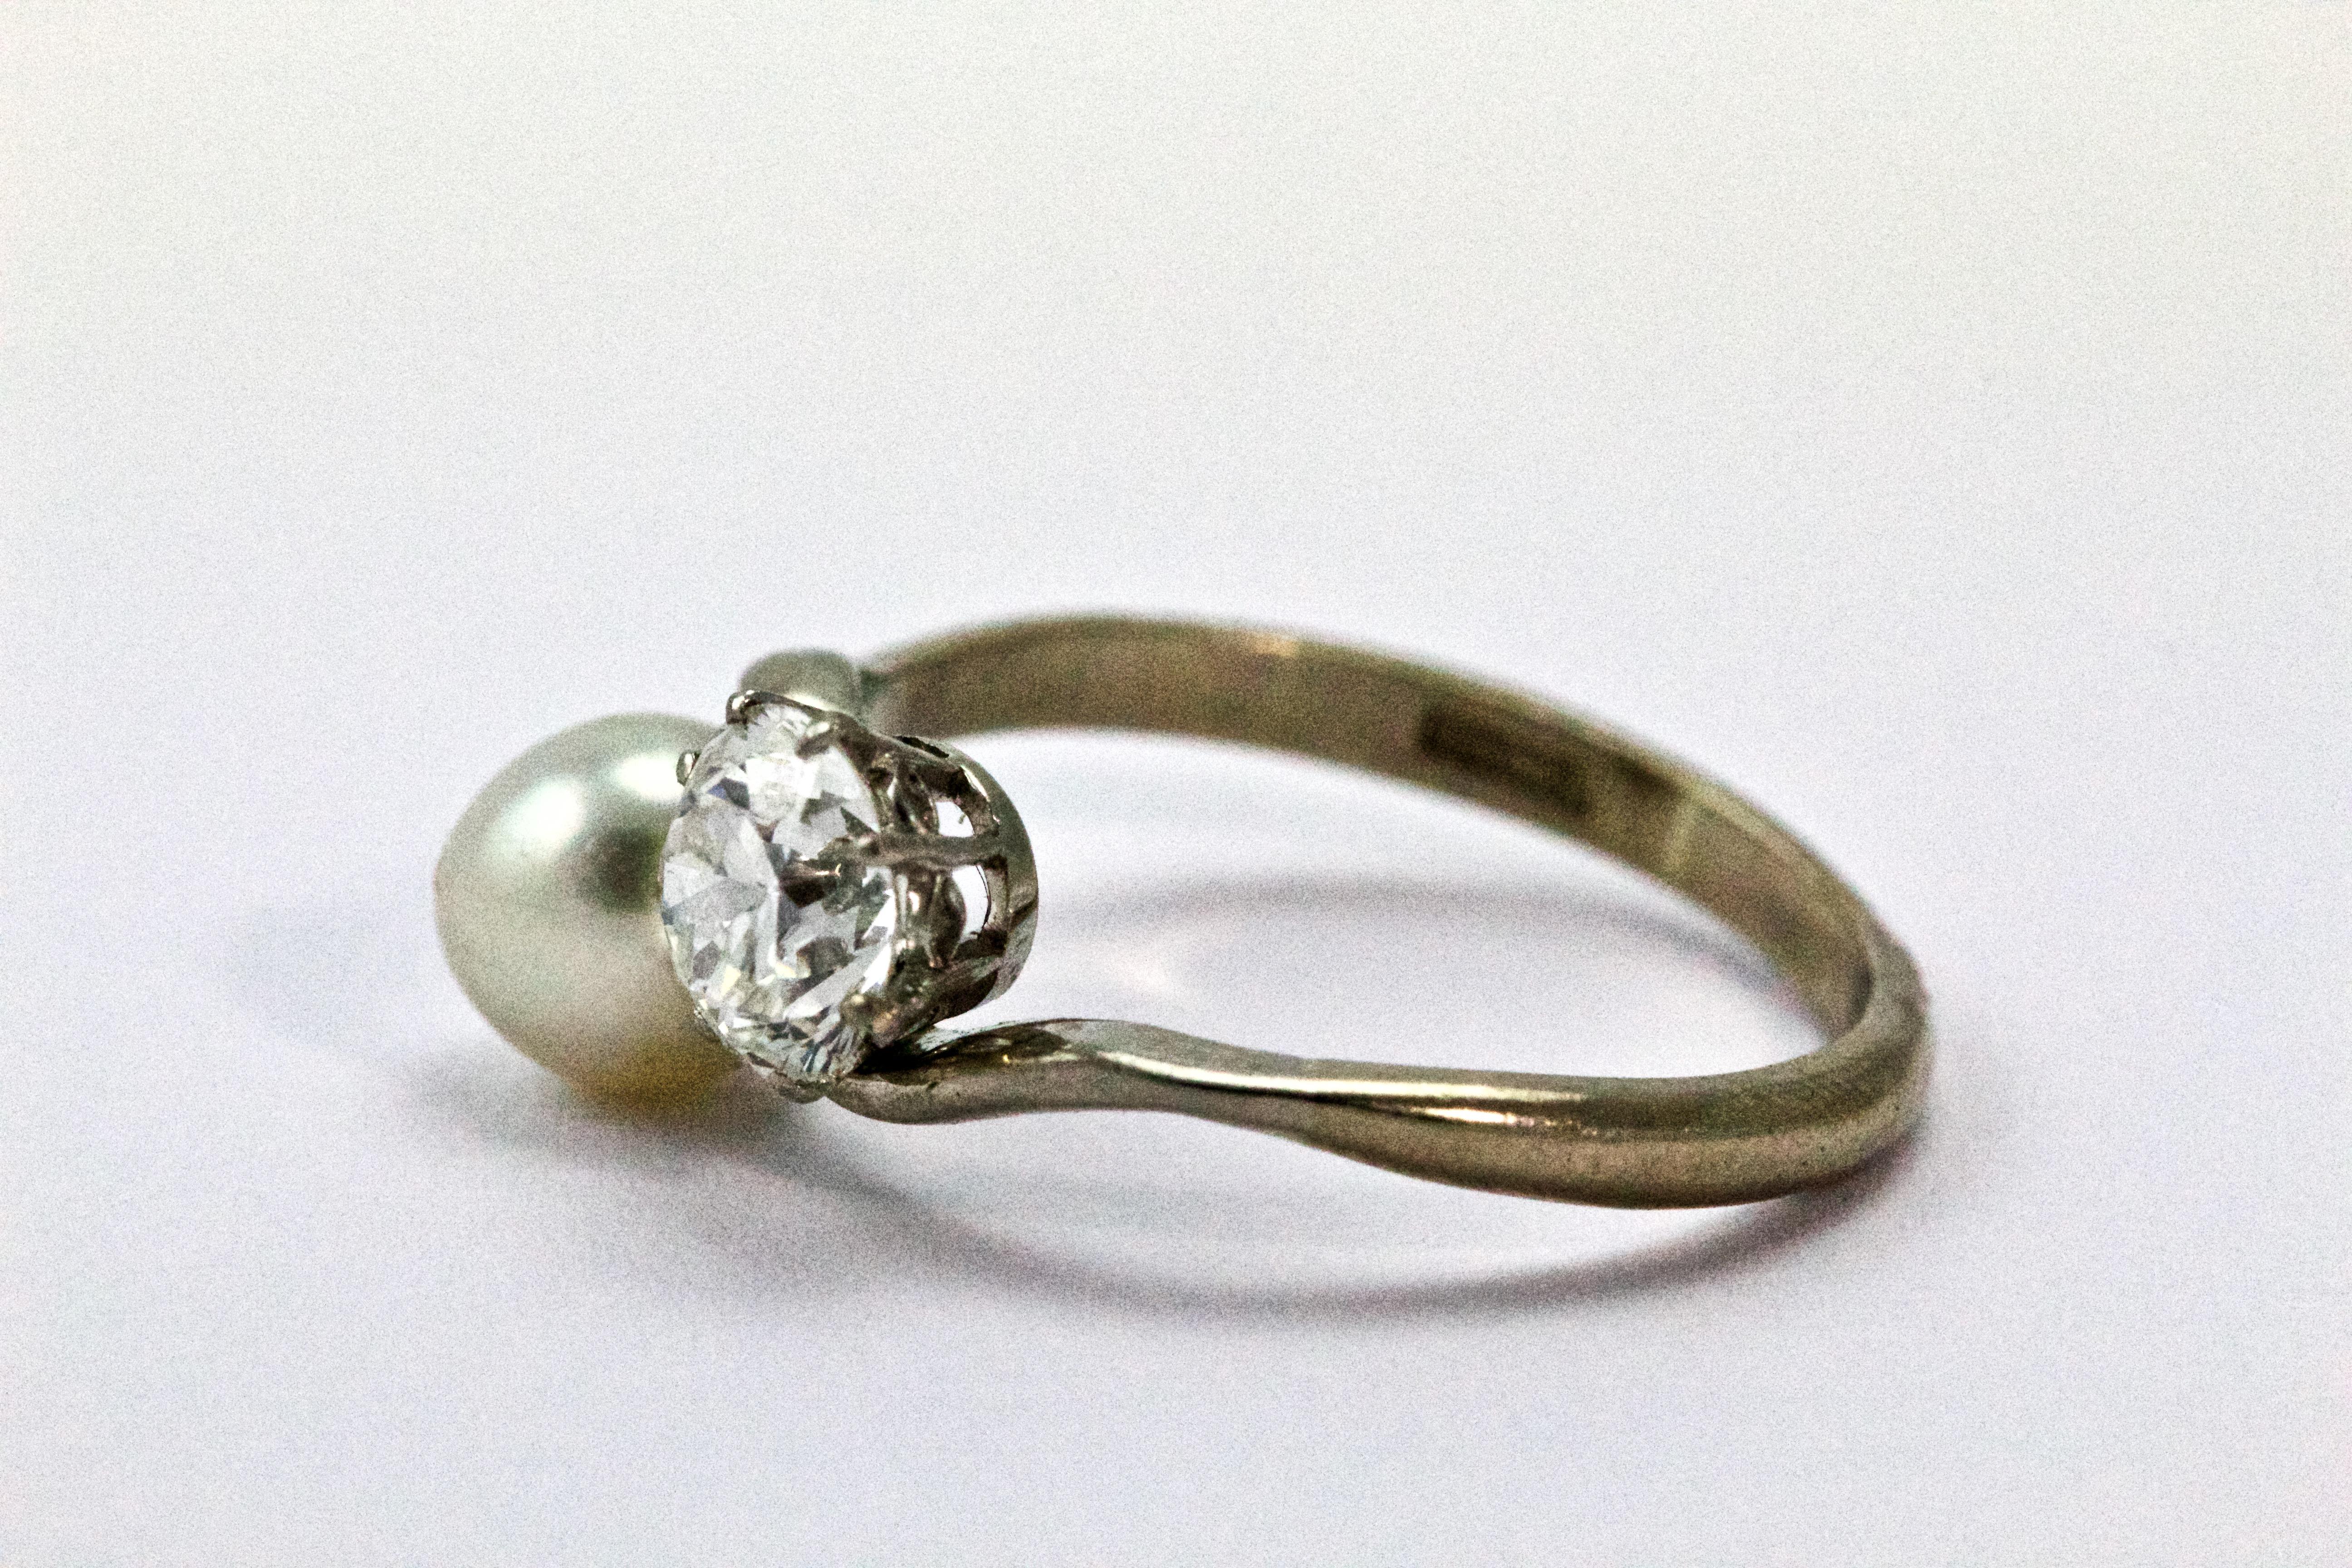 This elegant Edwardian ring features an Old European cut diamond claw set and a natural pearl. The diamond is certified 1.02 ct with colour H and clarity VS1. The pearl and the diamond are set in 18 carat white gold in a crossover design, also